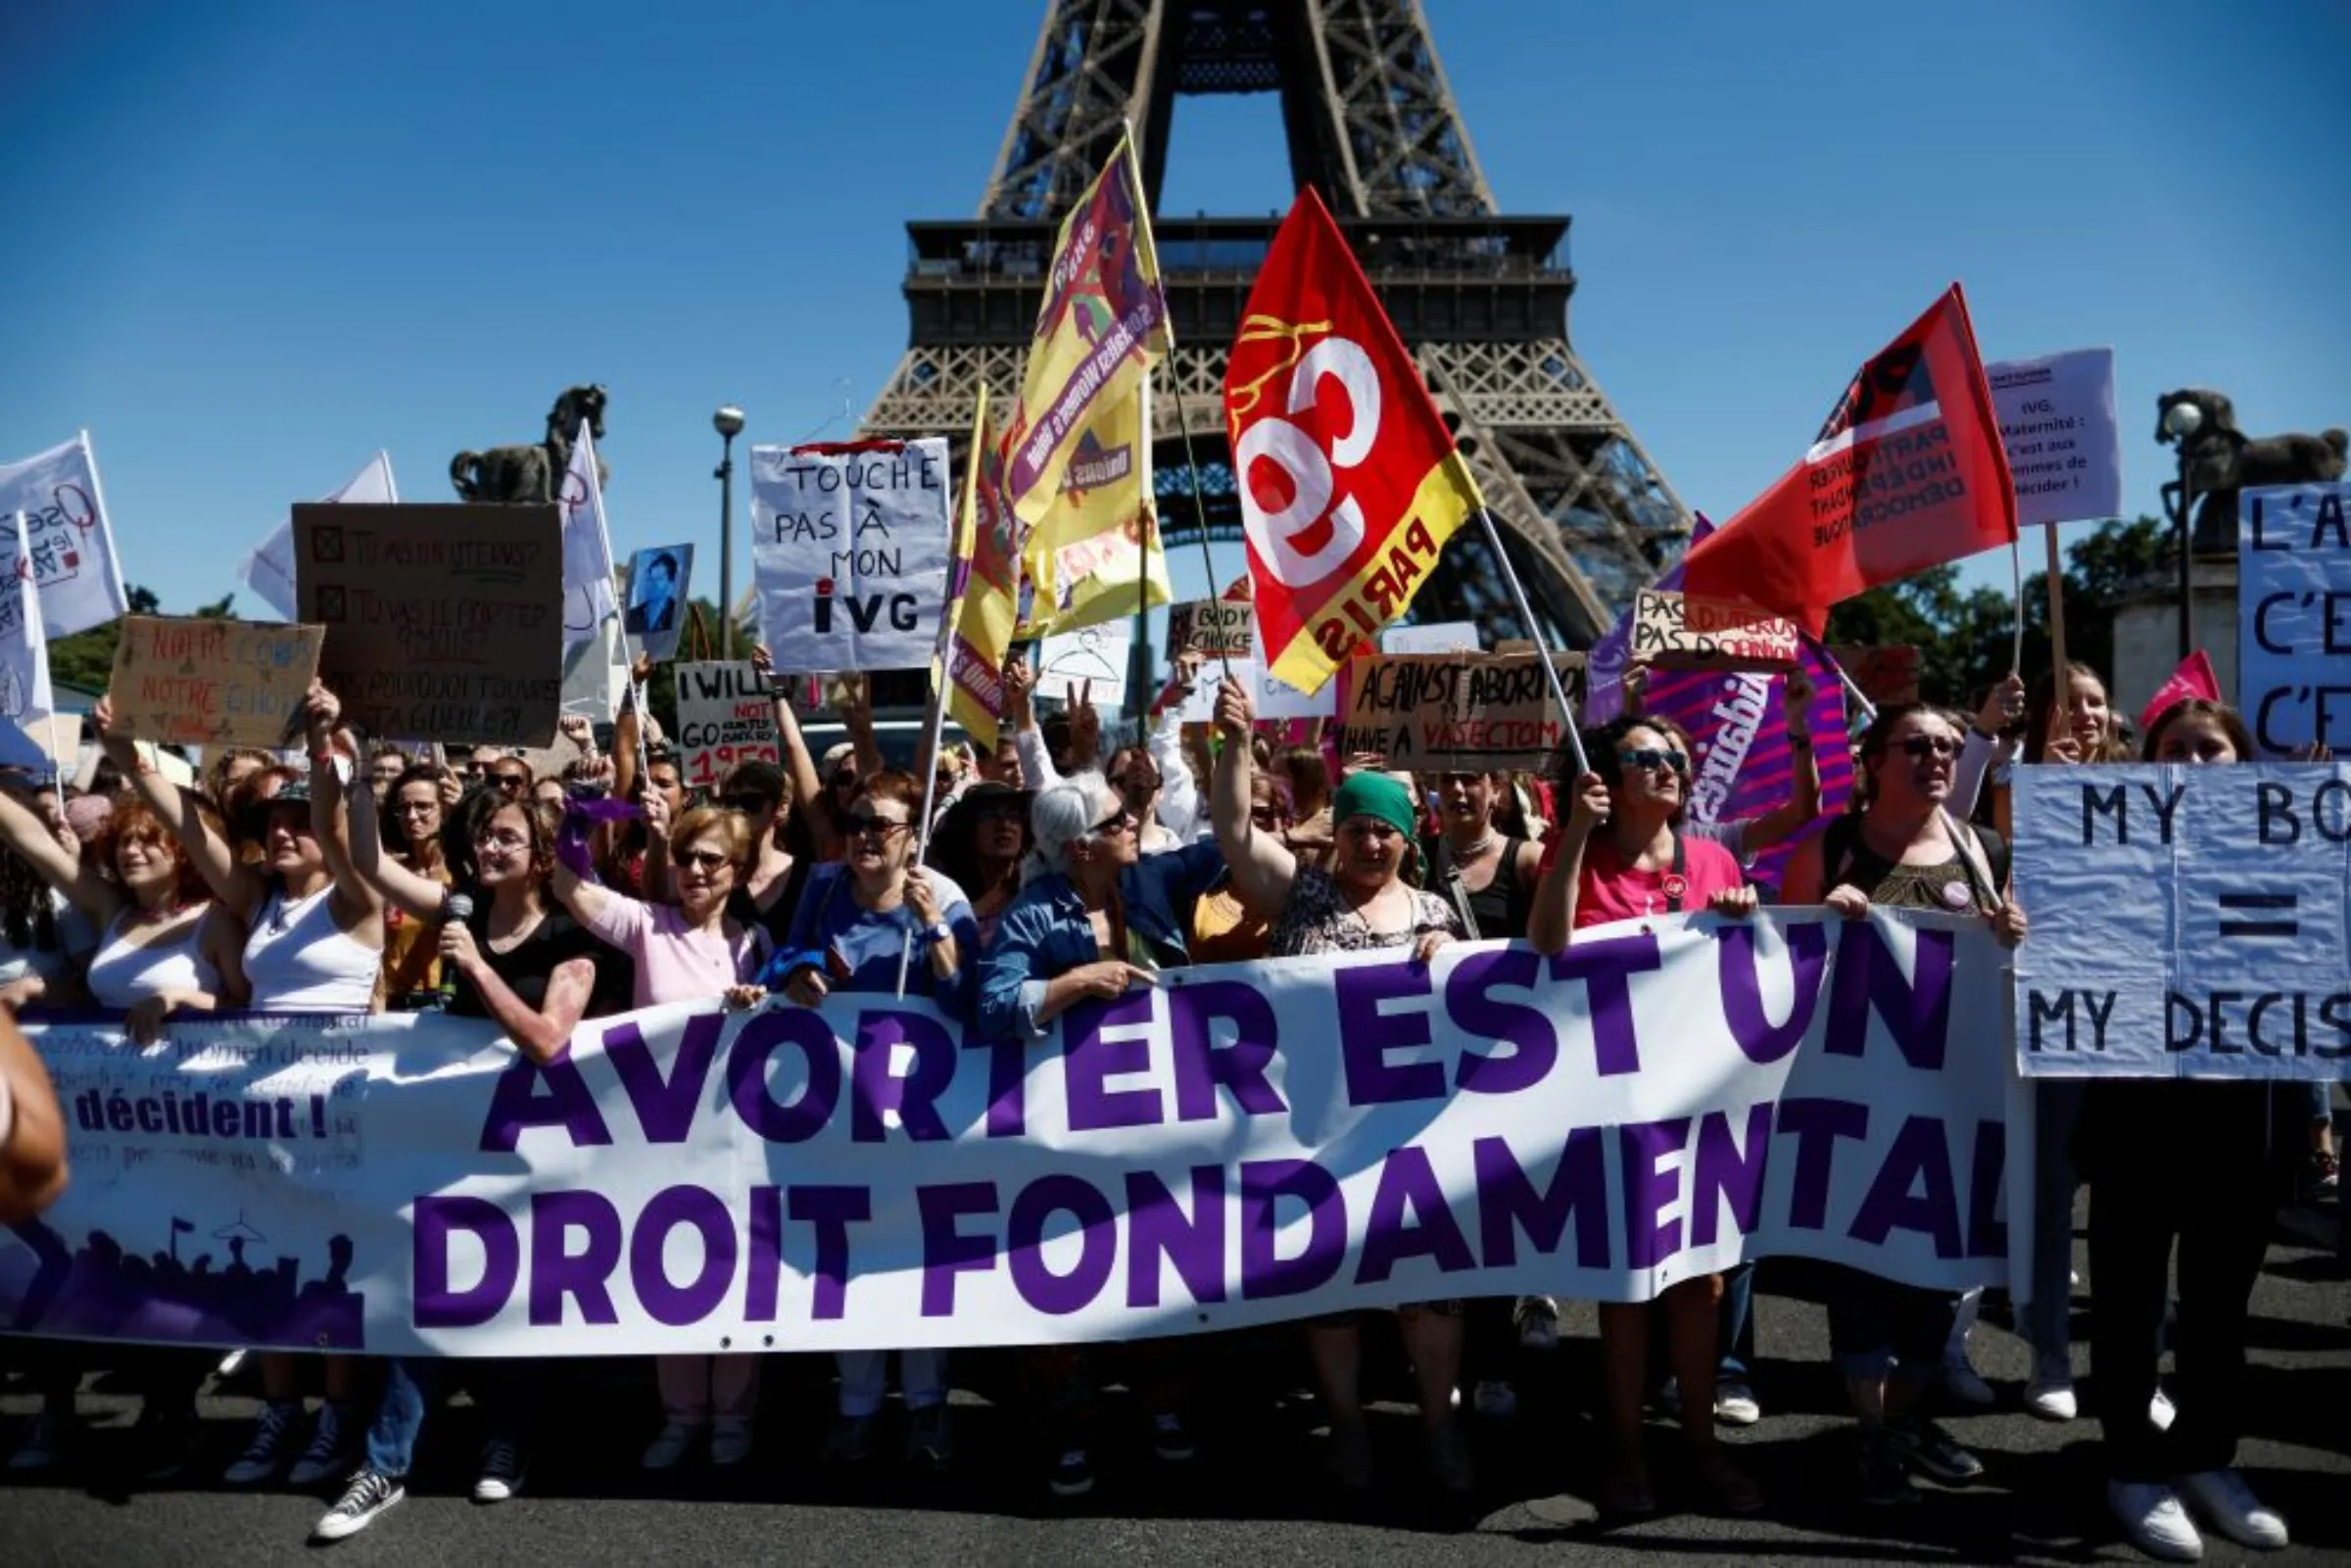 Protesters hold a banner reading 'abortion is a basic right' during a rally in support of abortion rights following the U.S. Supreme Court overturning Roe v. Wade, in Paris, France, July 2, 2022